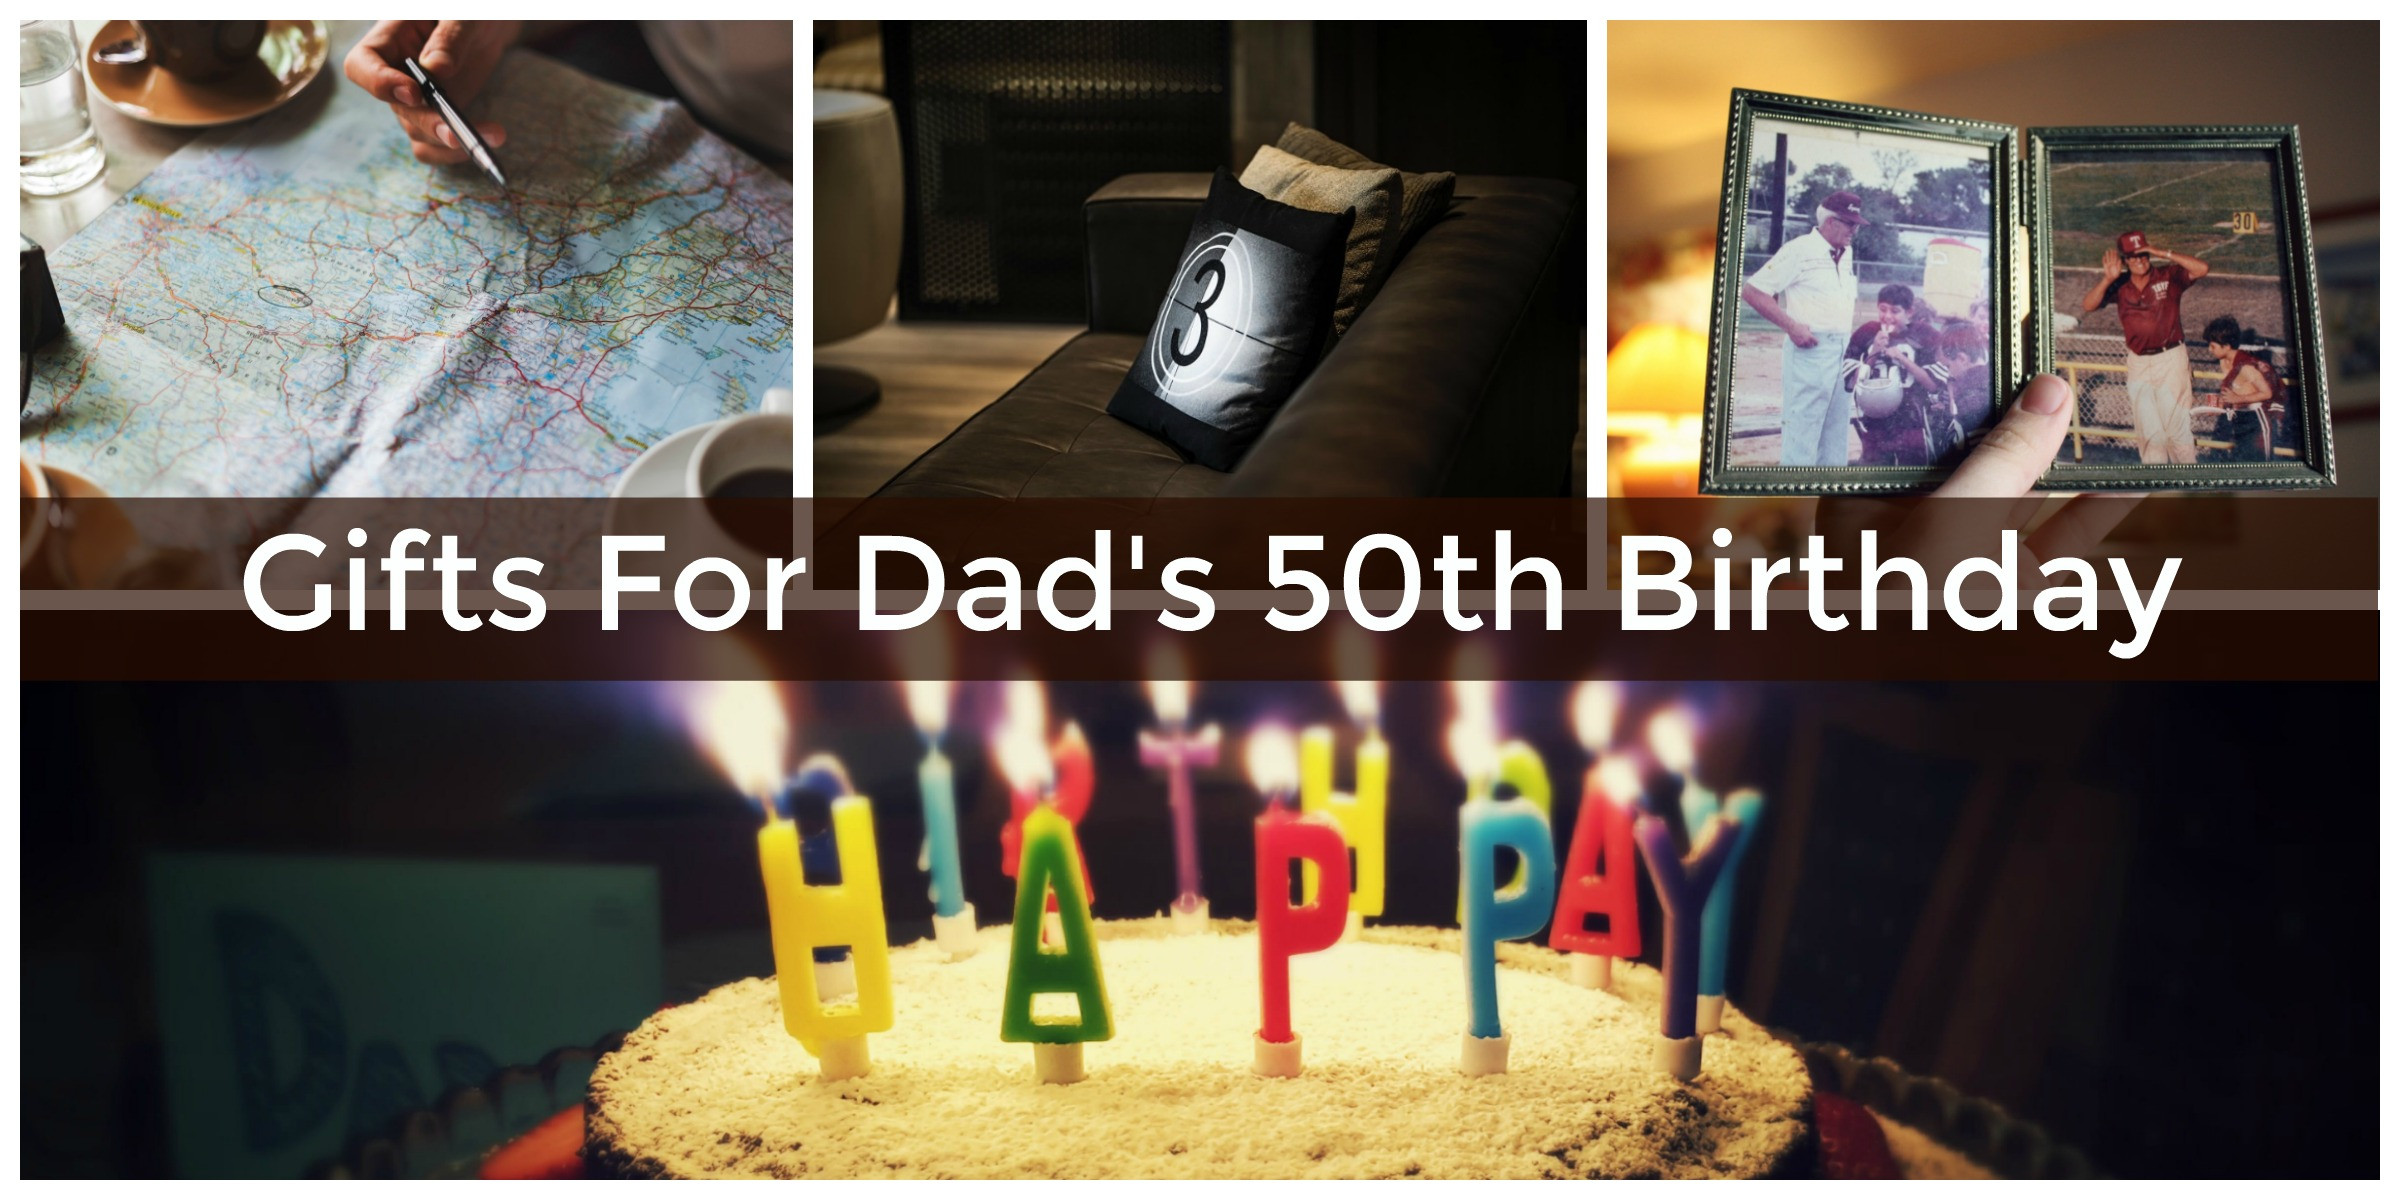 50Th Birthday Gift Ideas For Dad
 The Best 50th Birthday Gift Ideas for Dad